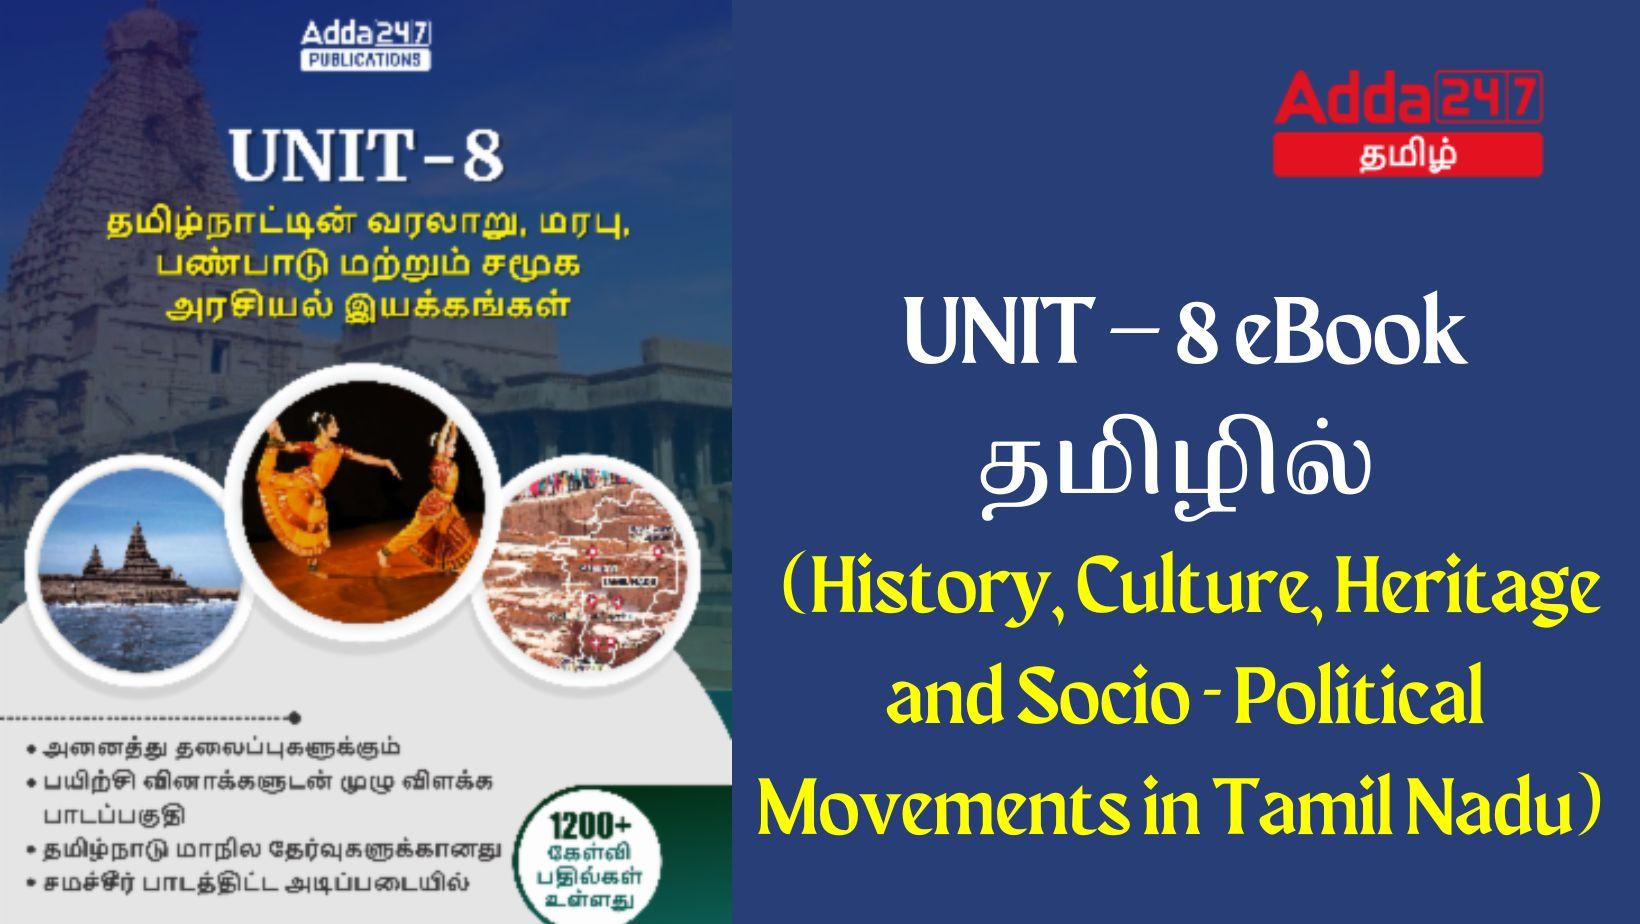 Unit 8 eBook in Tamil - History, Culture, Heritage and Socio - Political Movements in Tamil Nadu_30.1